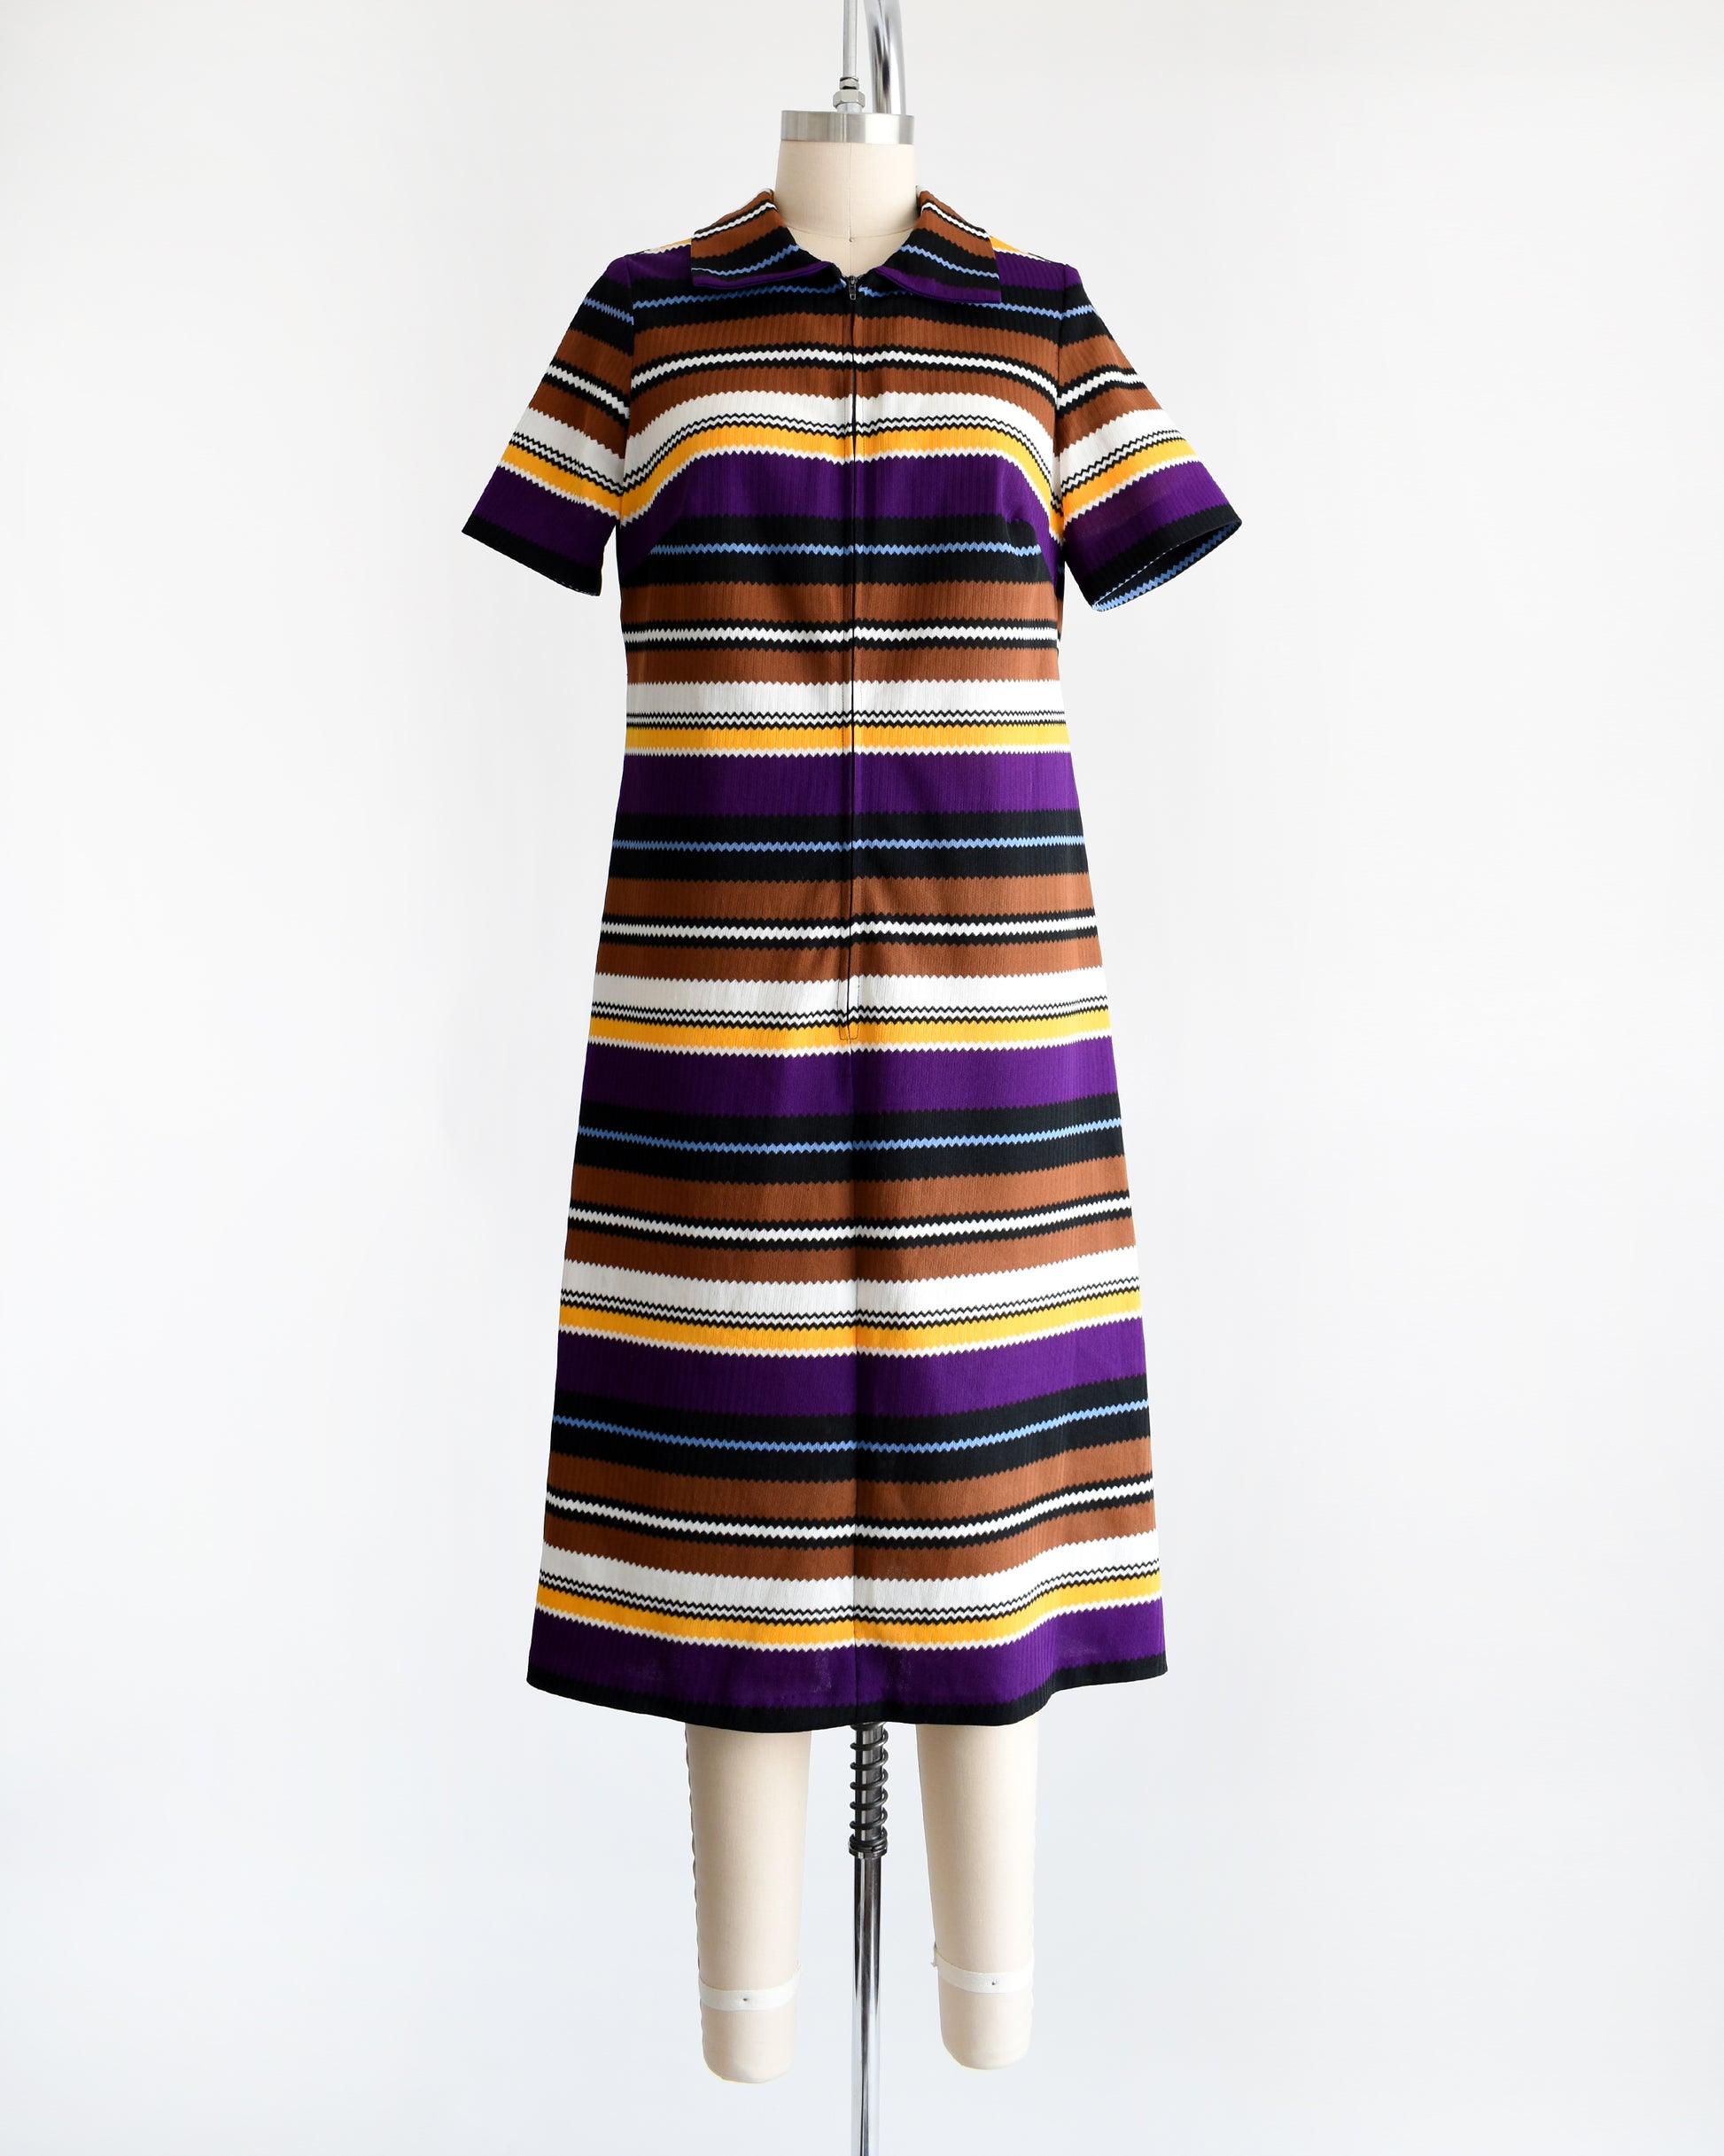 Front view of a vintage 1970s striped mod dress that has black, brown, white, blue, yellow, and purple horizontal stripes with zigzag edges. The dress features a zipper down the front which is zipped up in this photo.